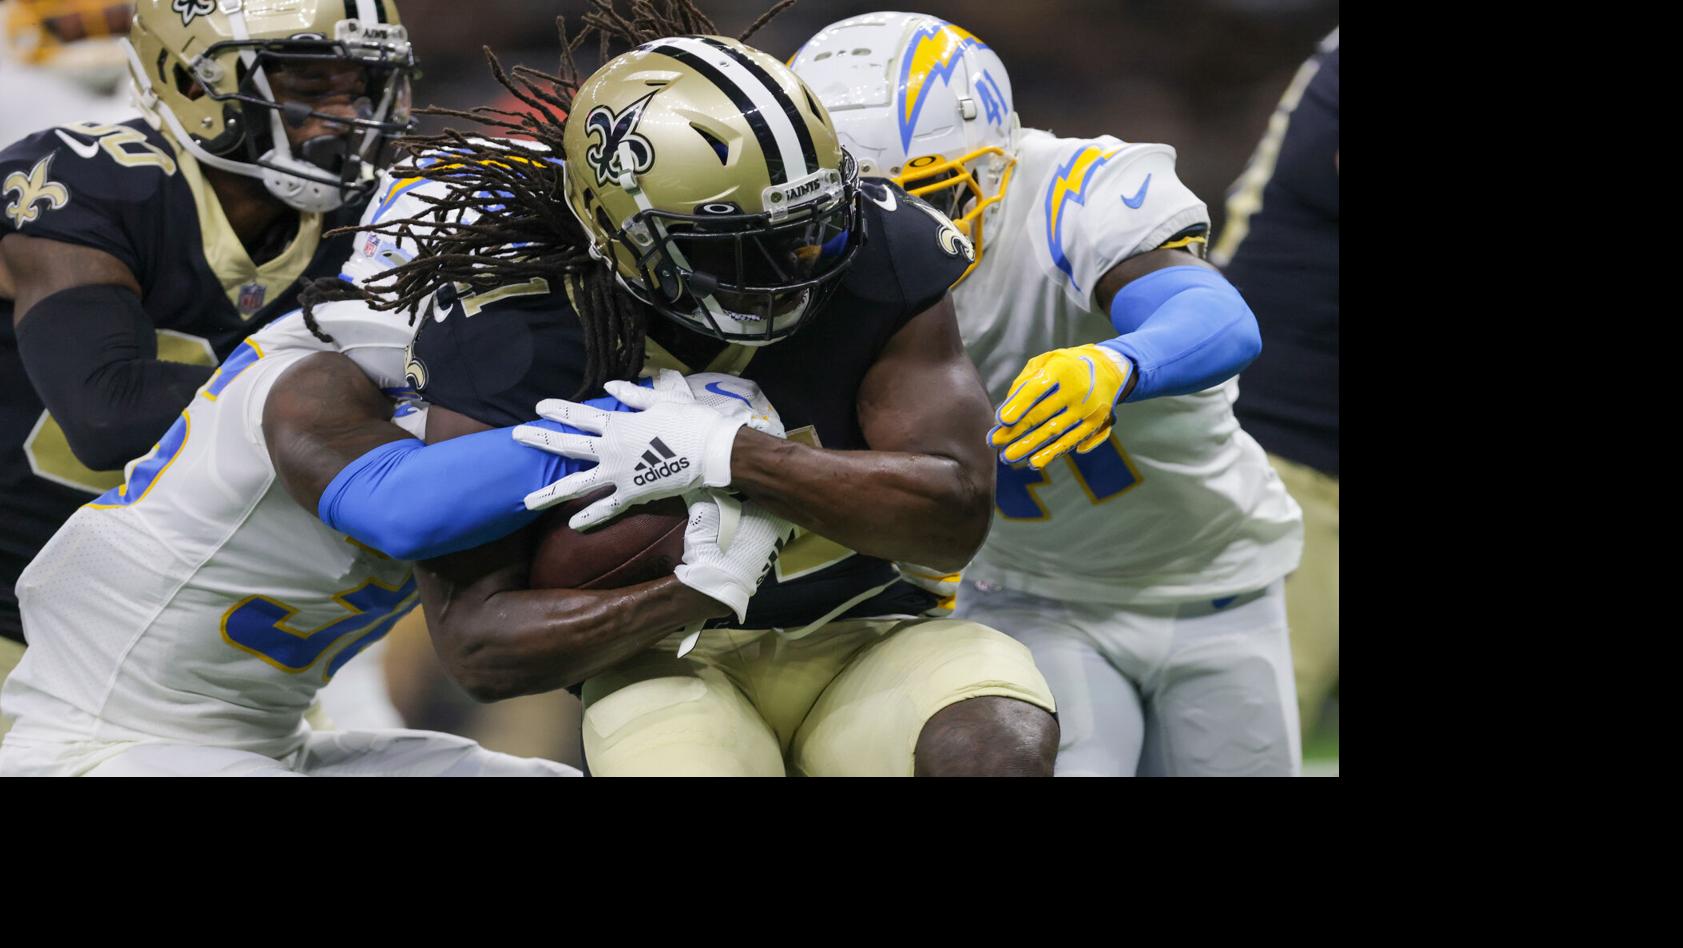 Saints-Chargers: How to watch, stream preseason game